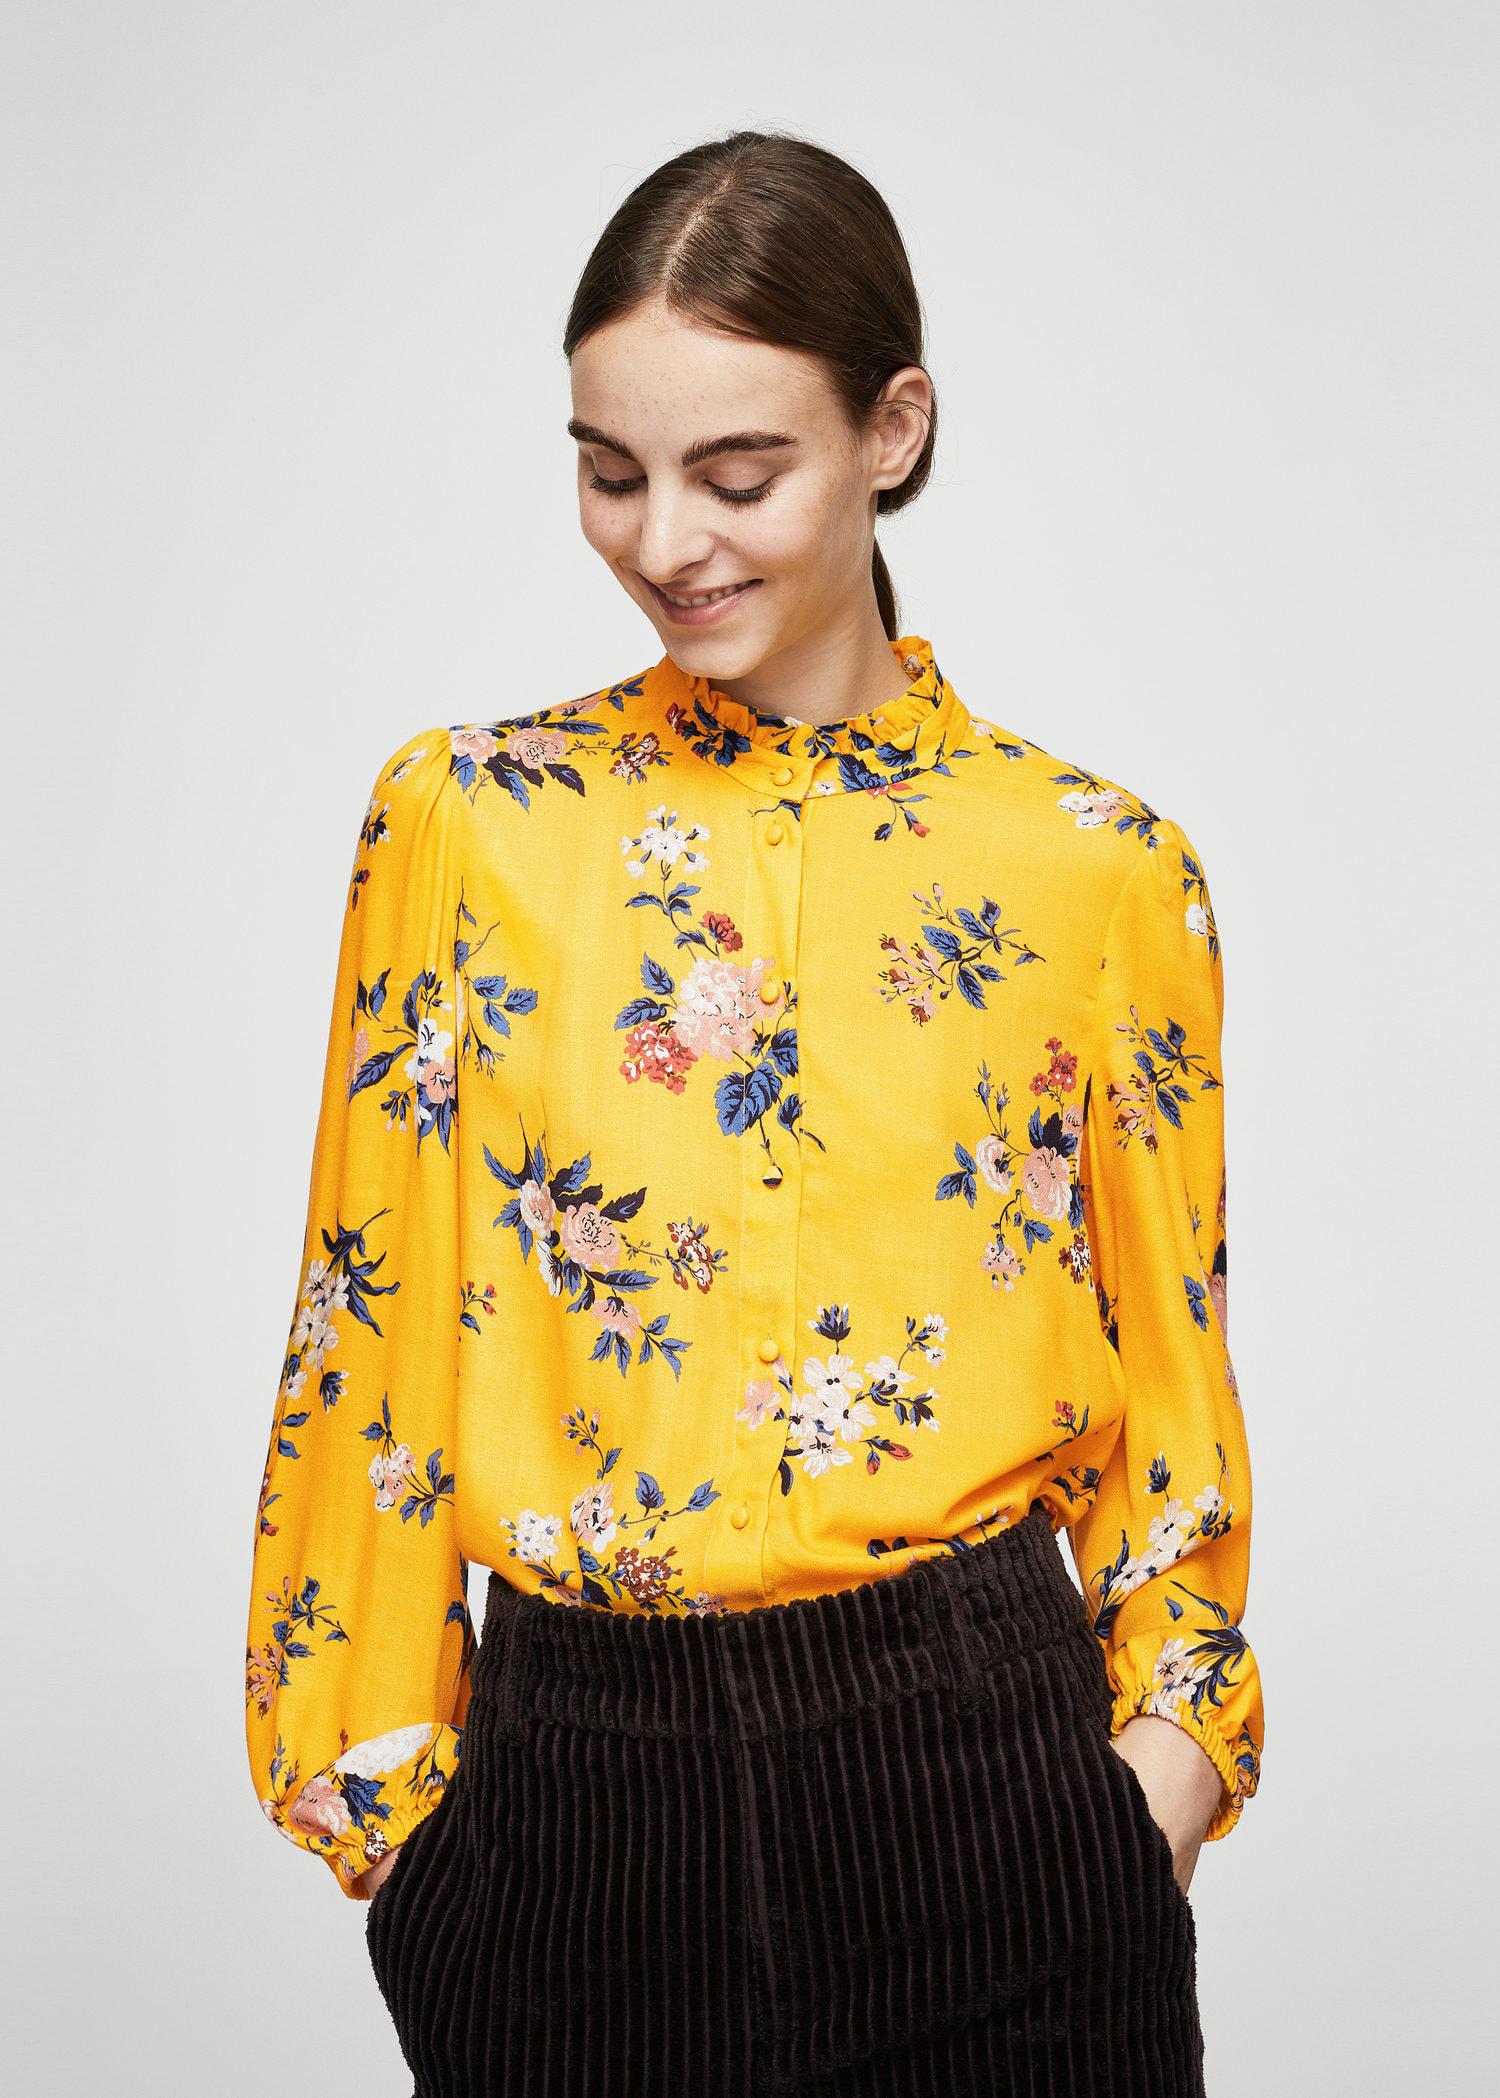 Lyst - Mango Yellow Floral Print 'lazo' High Neck Top in Yellow